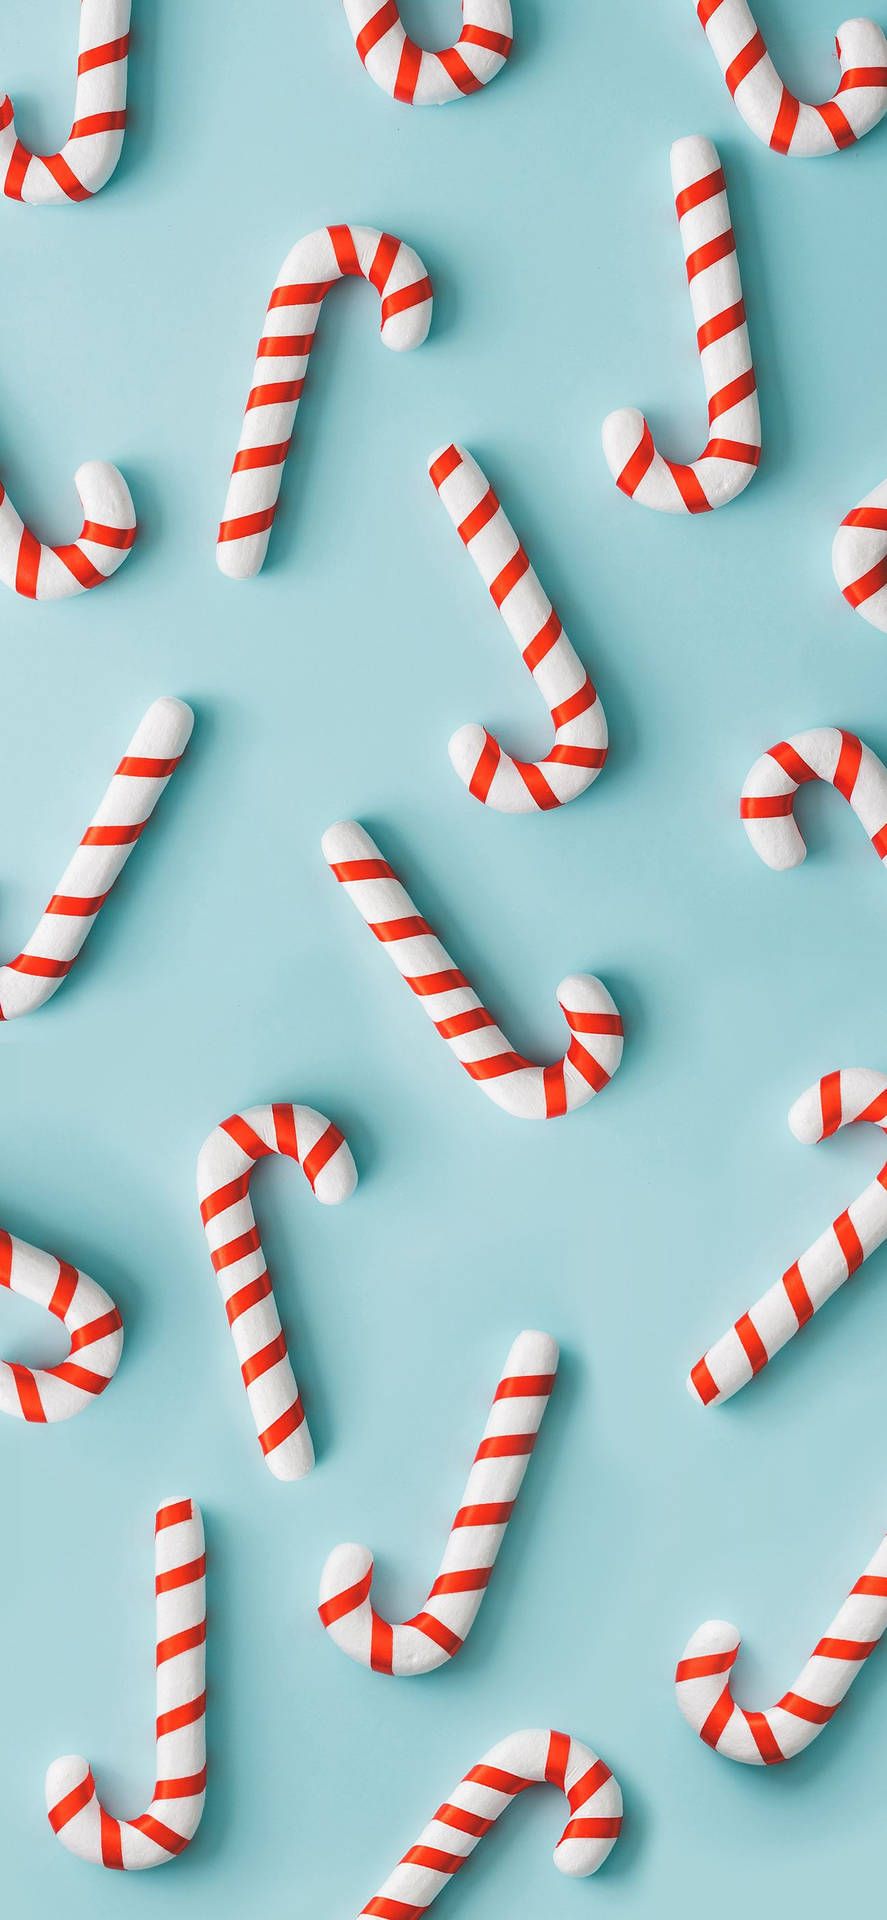 A close up of candy canes on blue background - Candy, candy cane